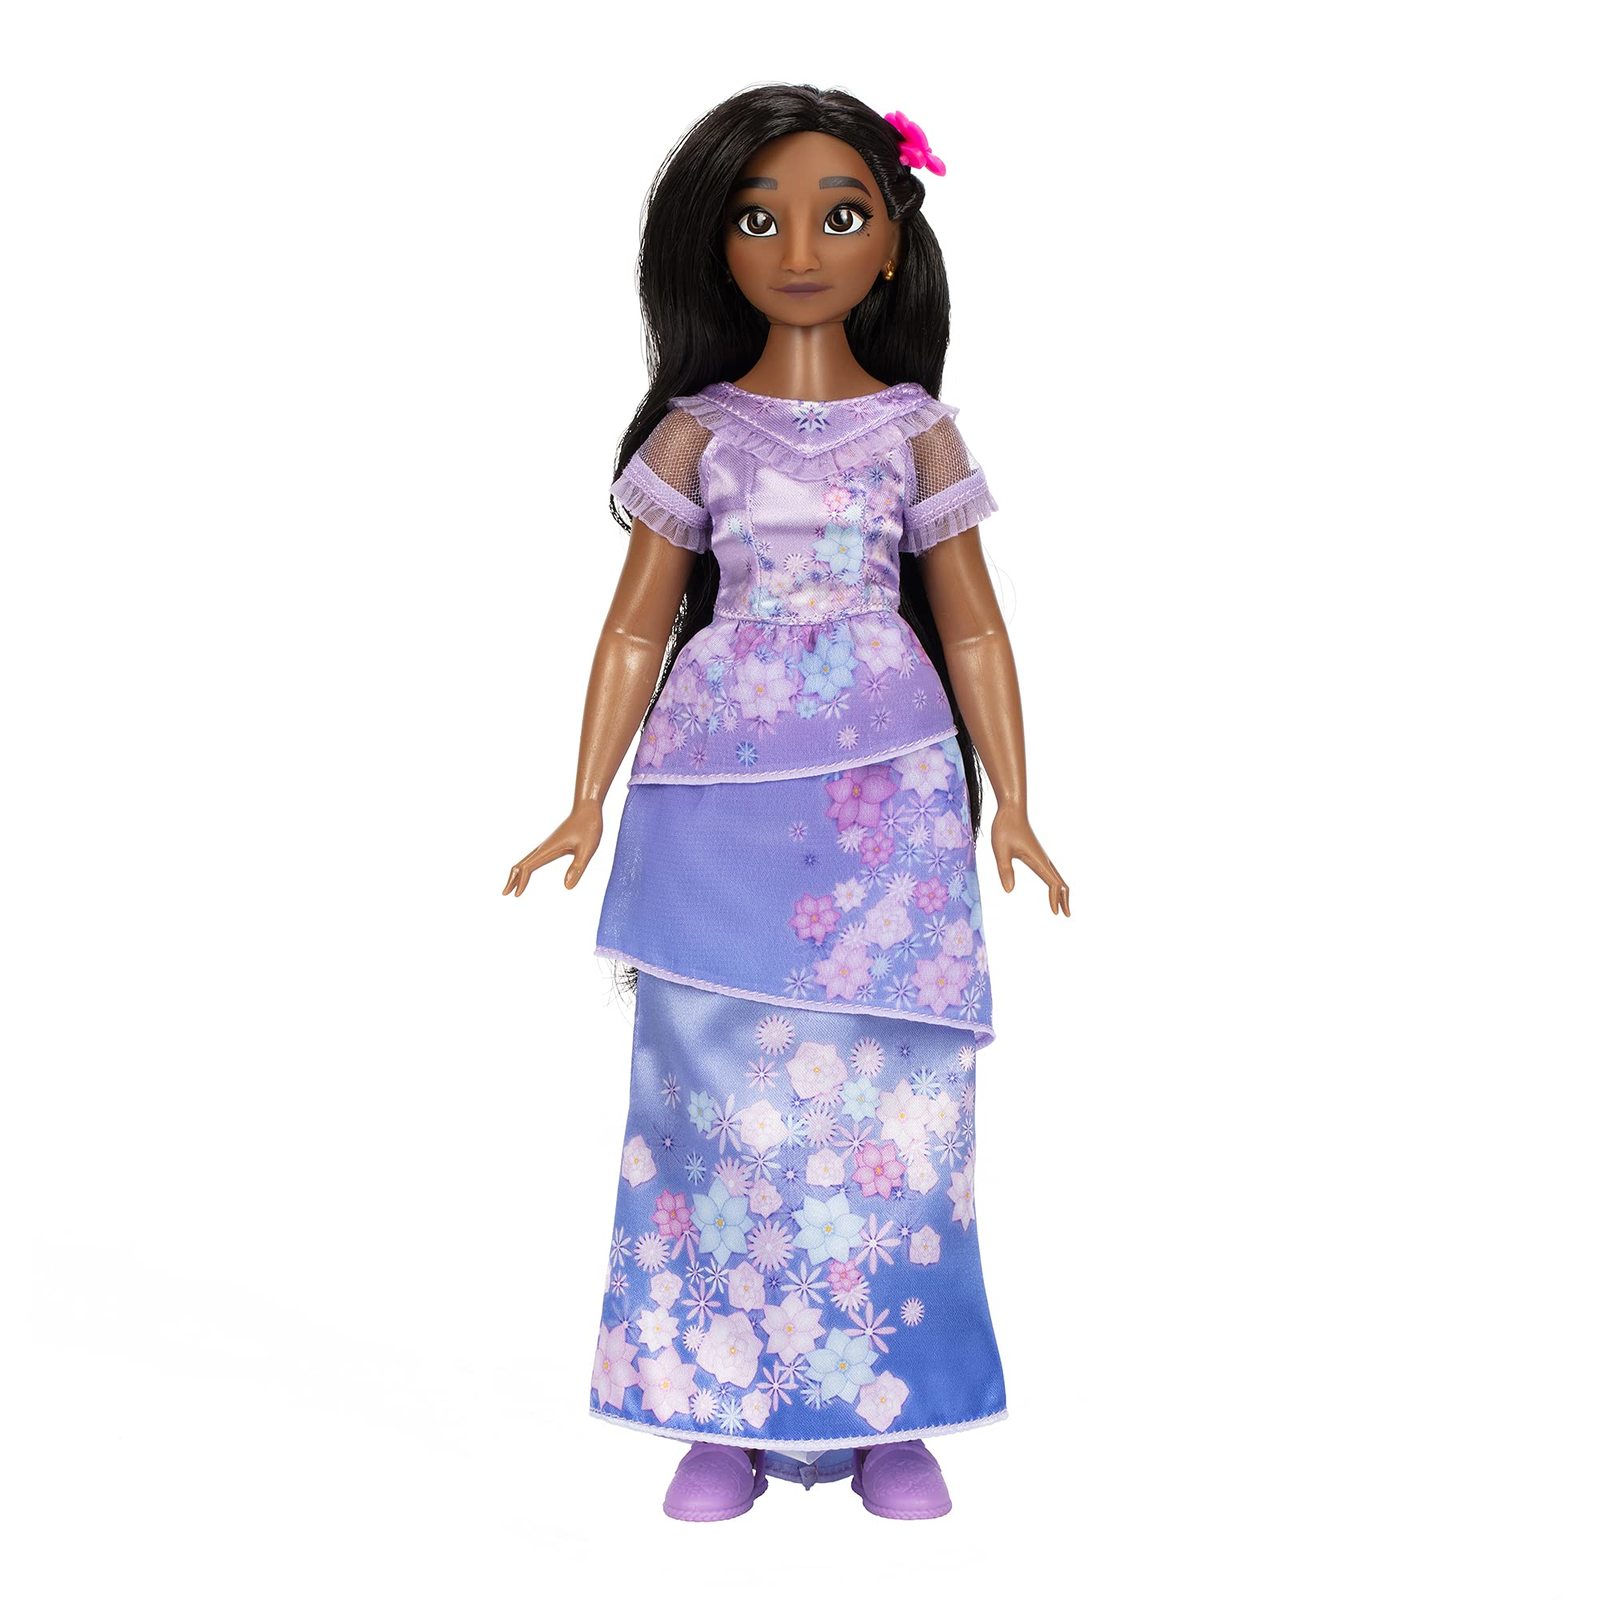 Primary image for Disney Encanto Isabela Fashion Doll with Dress, Shoes & Hair Pin